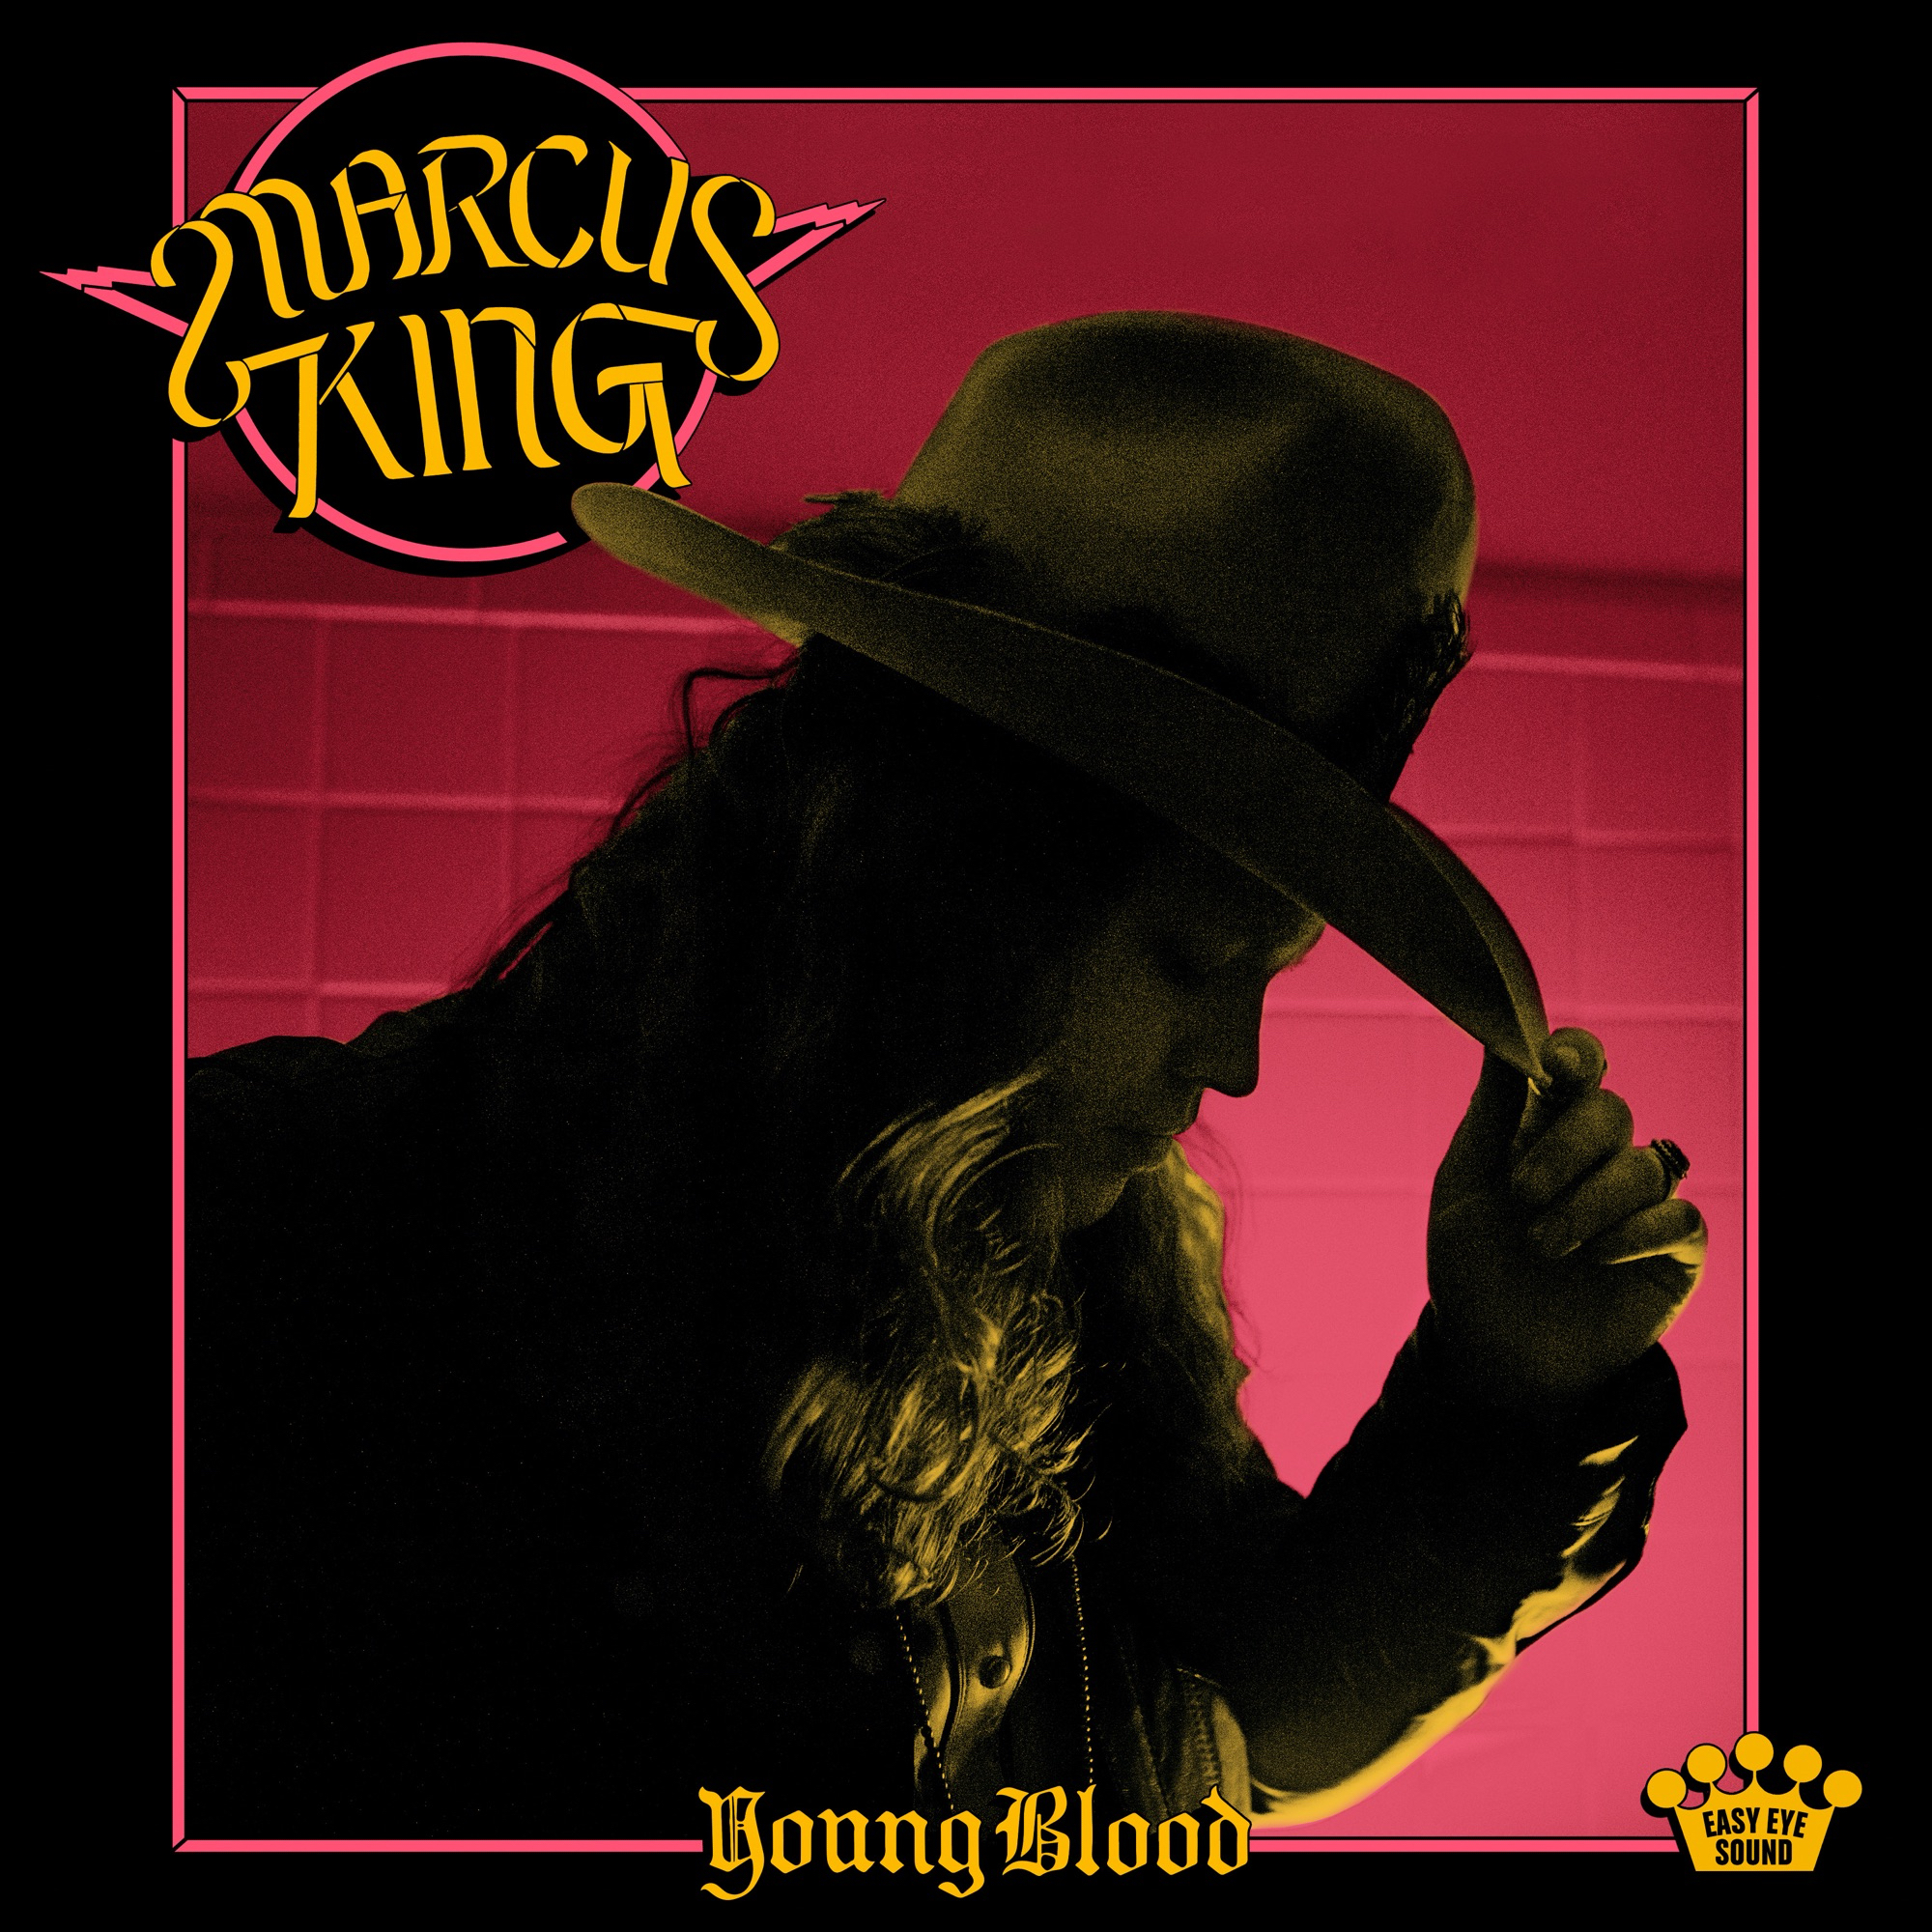 Marcus King — Blood On The Tracks cover artwork